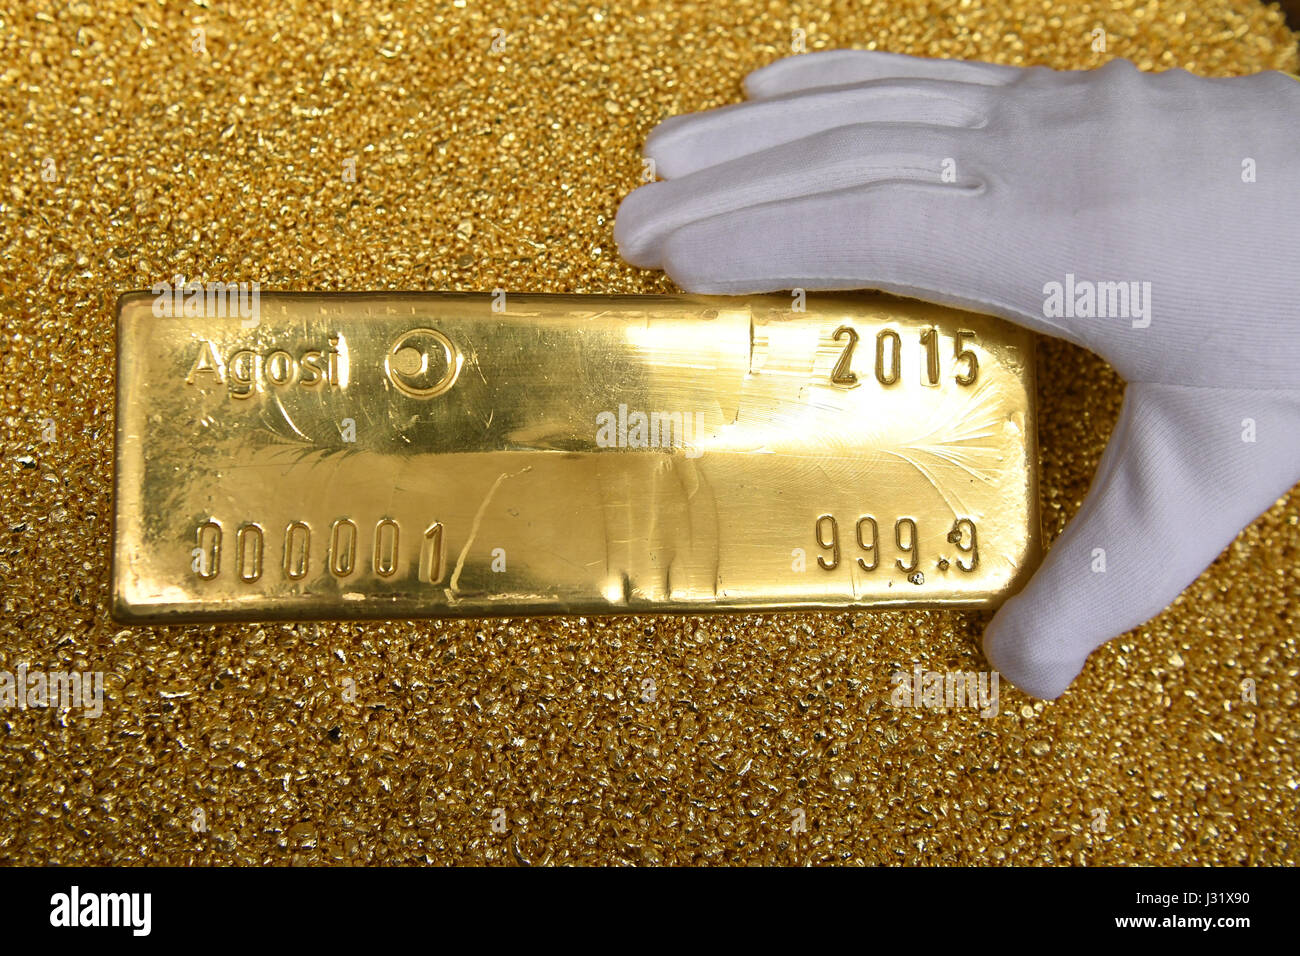 Pforzheim, Germany. 28th Apr, 2017. A gold bar weighing 12.5 kilograms, has  a fine gold content of 99.99 percent against granules of gold at the  company Allgemeine Gold- und Silberscheideanstalt Agosi in